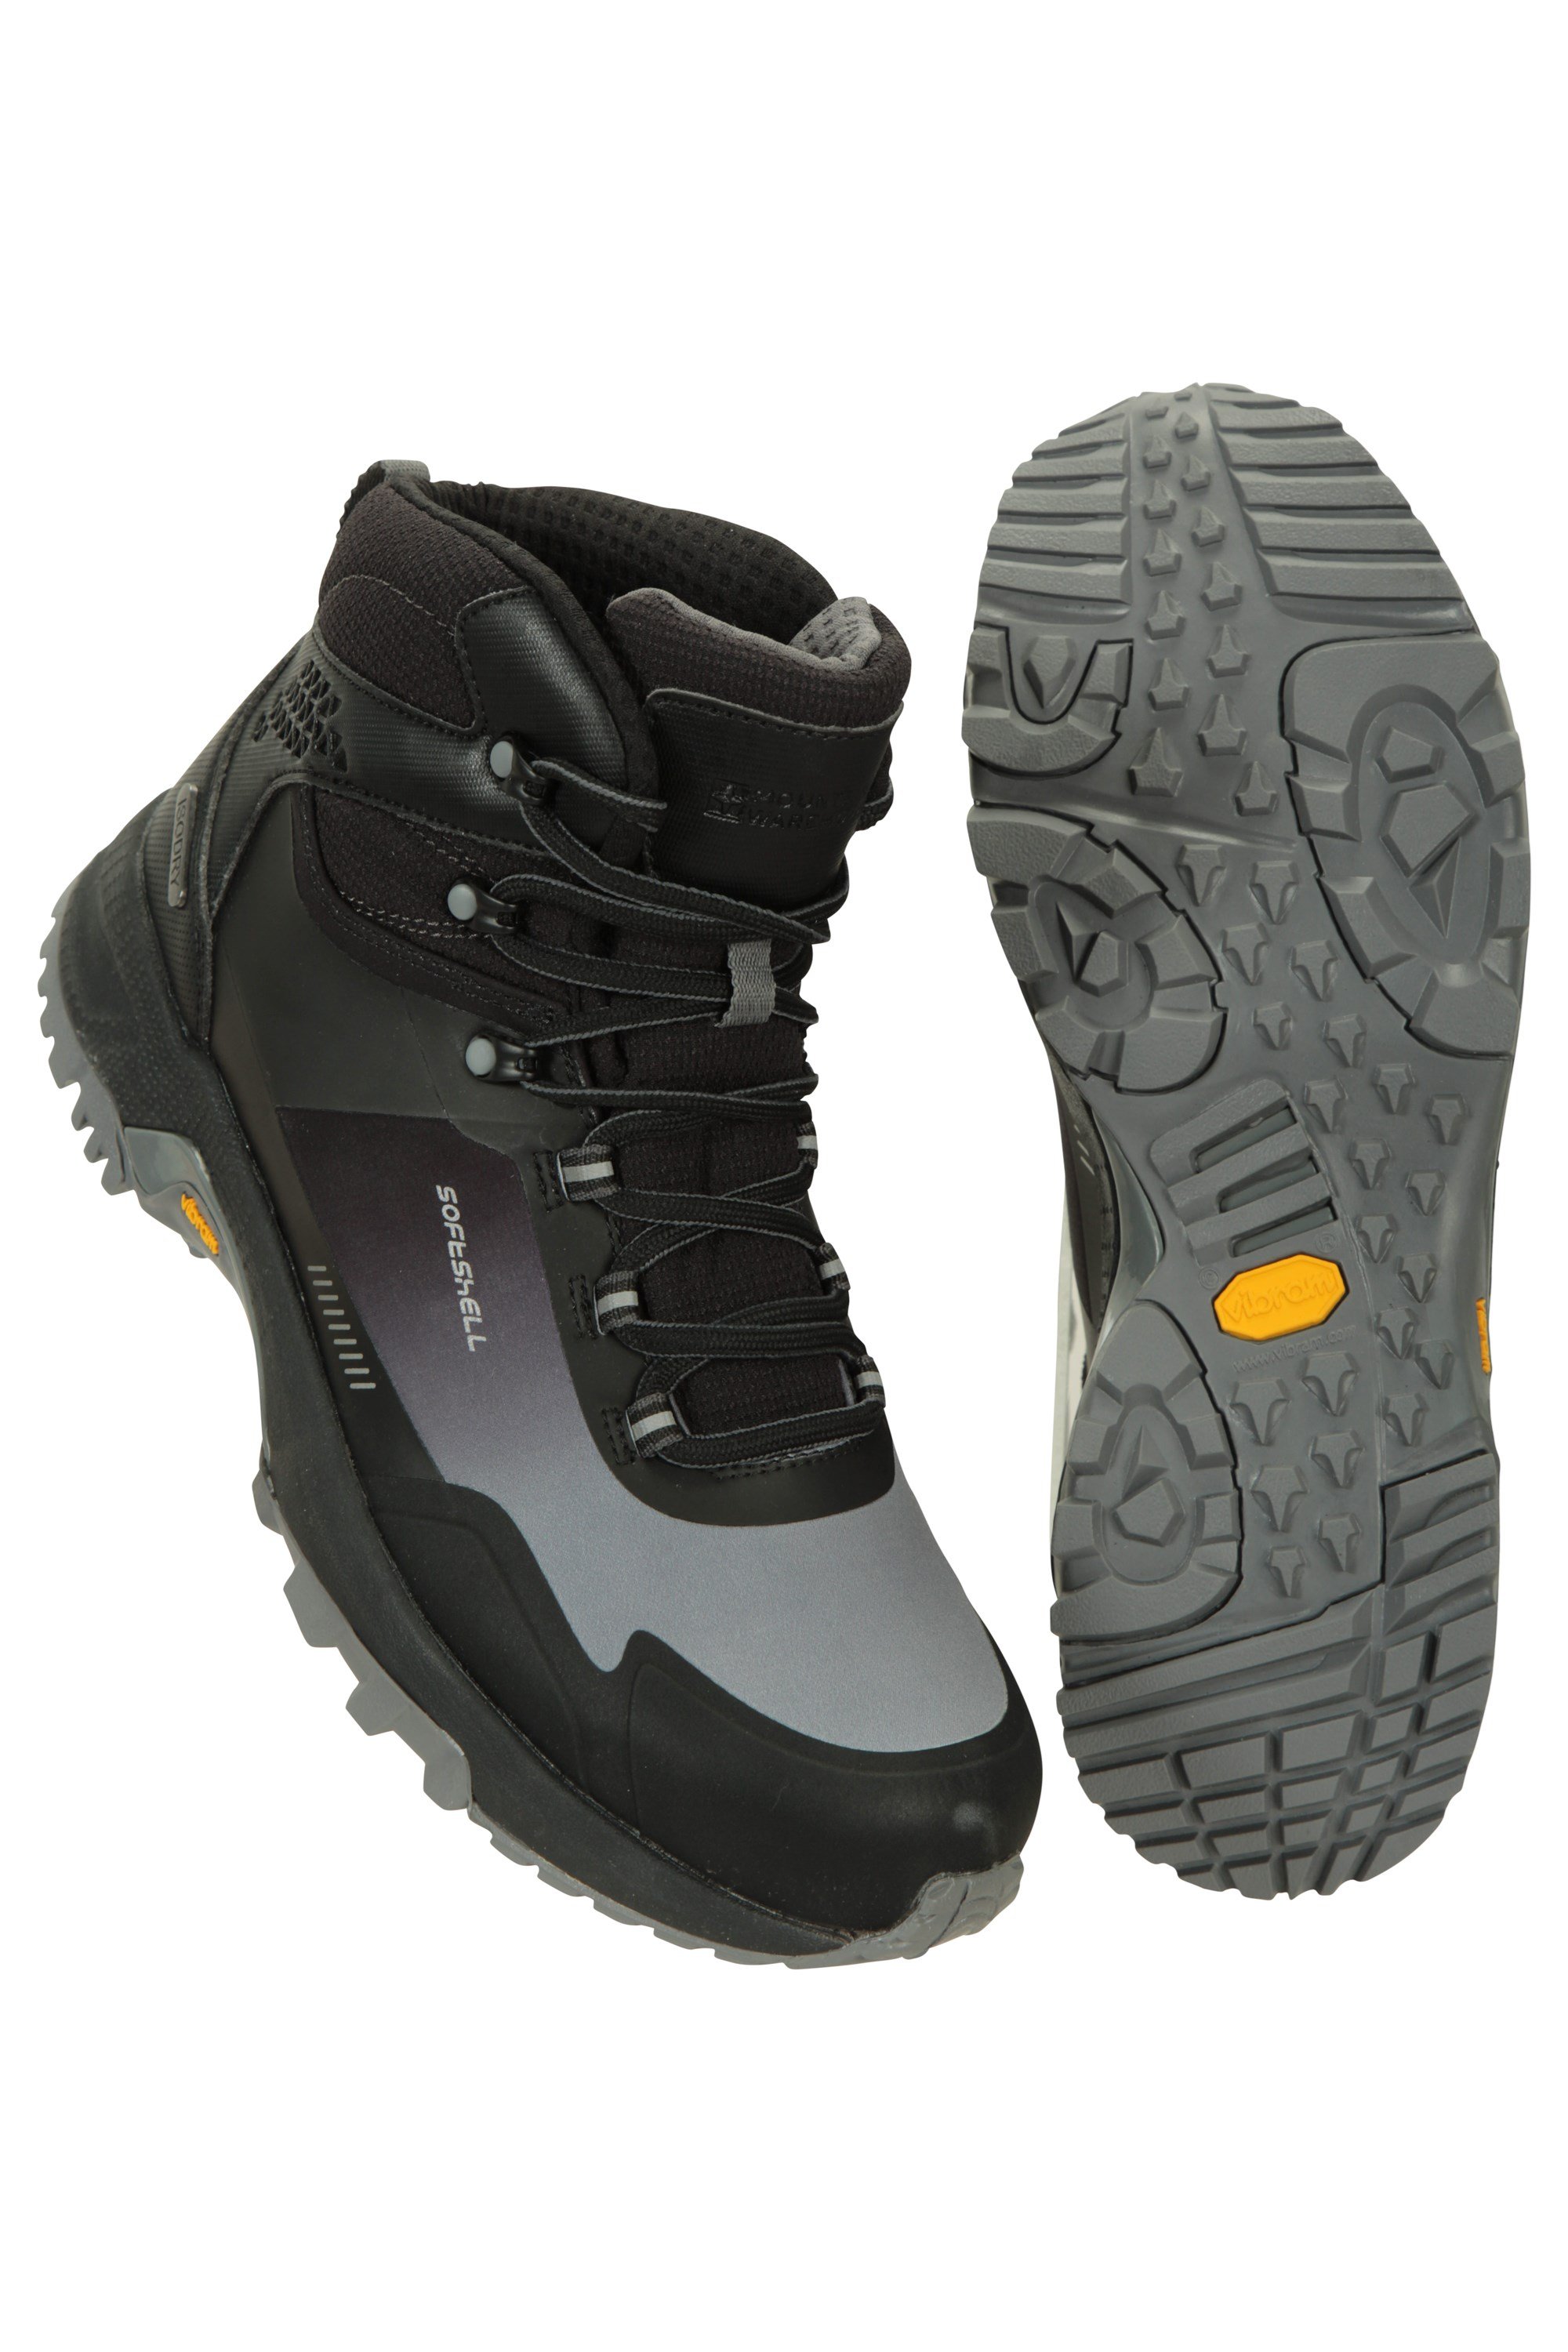 Extreme Spectrum Mens Waterproof Softshell Boots - Grey